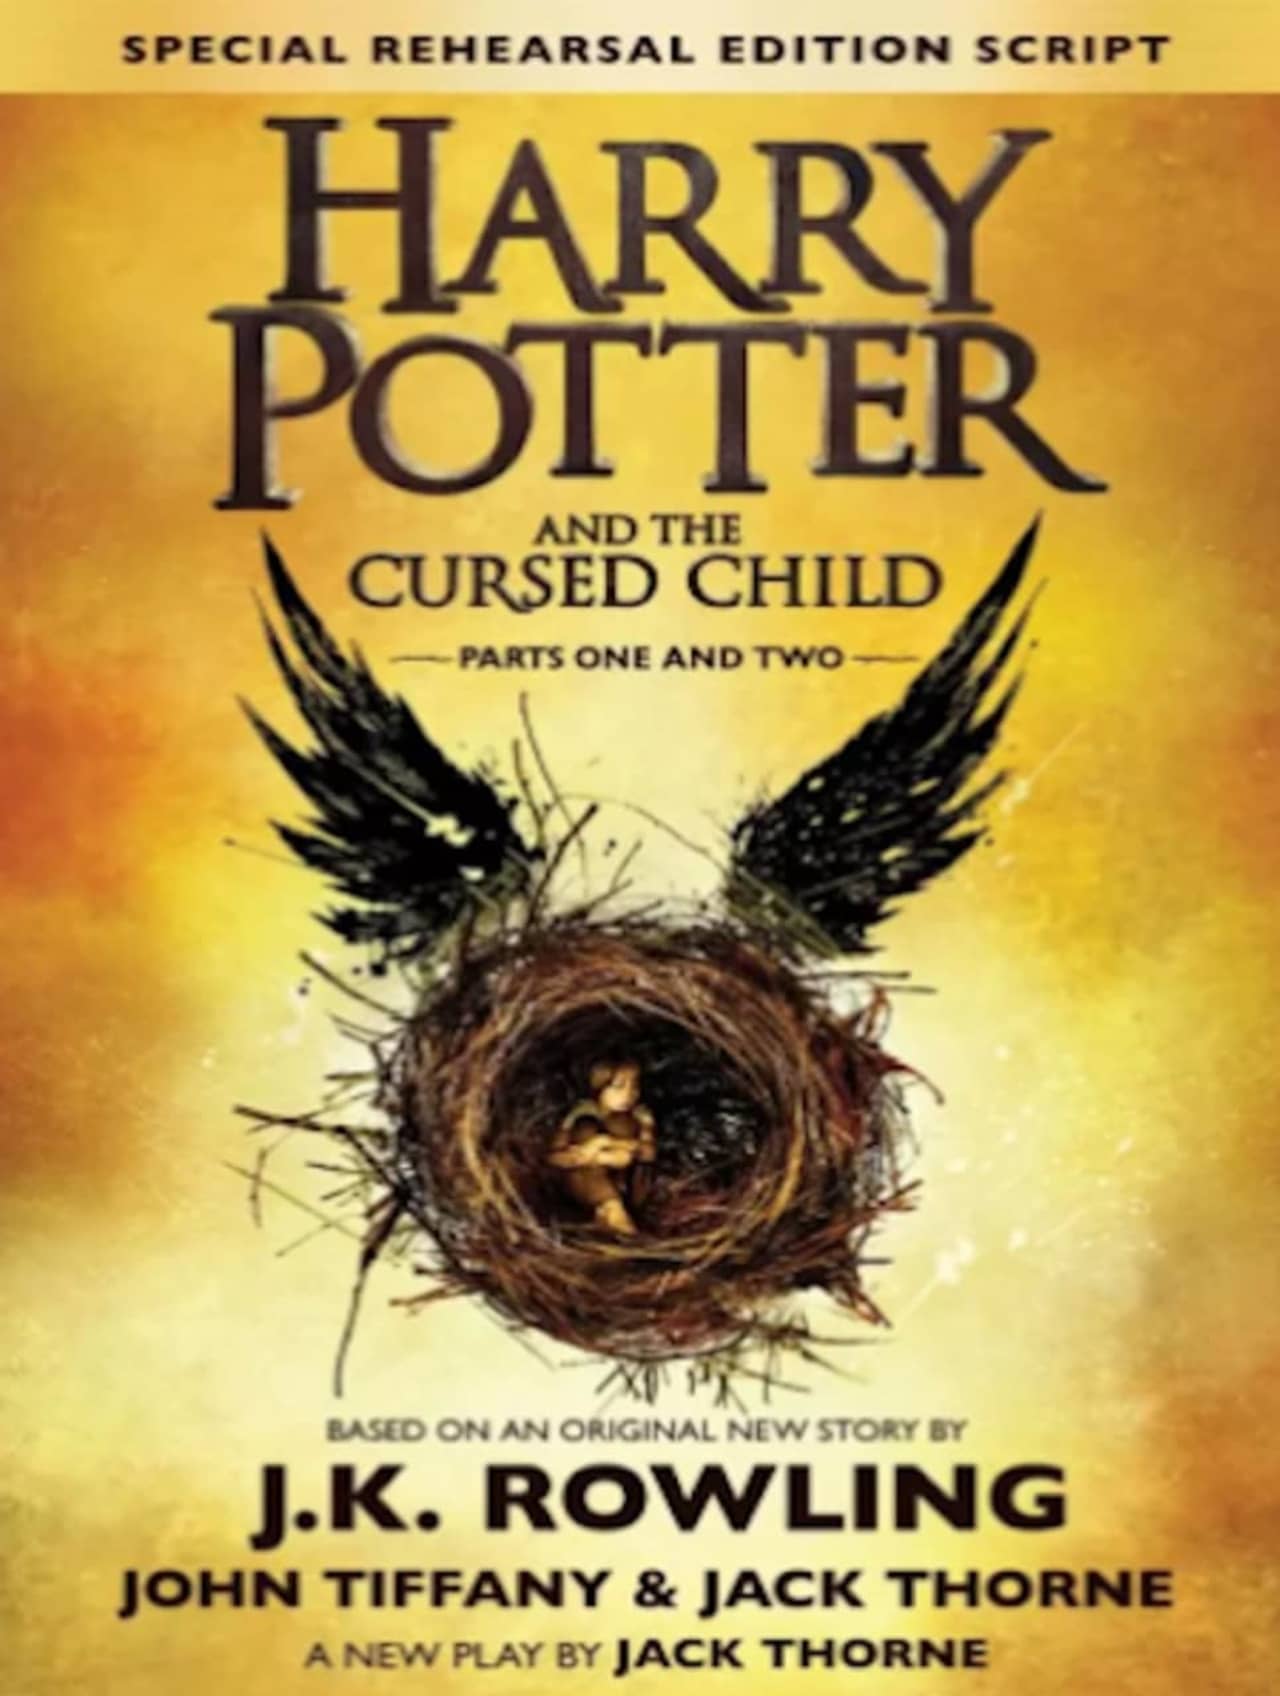 The book "Harry Potter and the Cursed Child" is a special-edition script of the play by the same name, which will open on June 30, a day before the book is released.